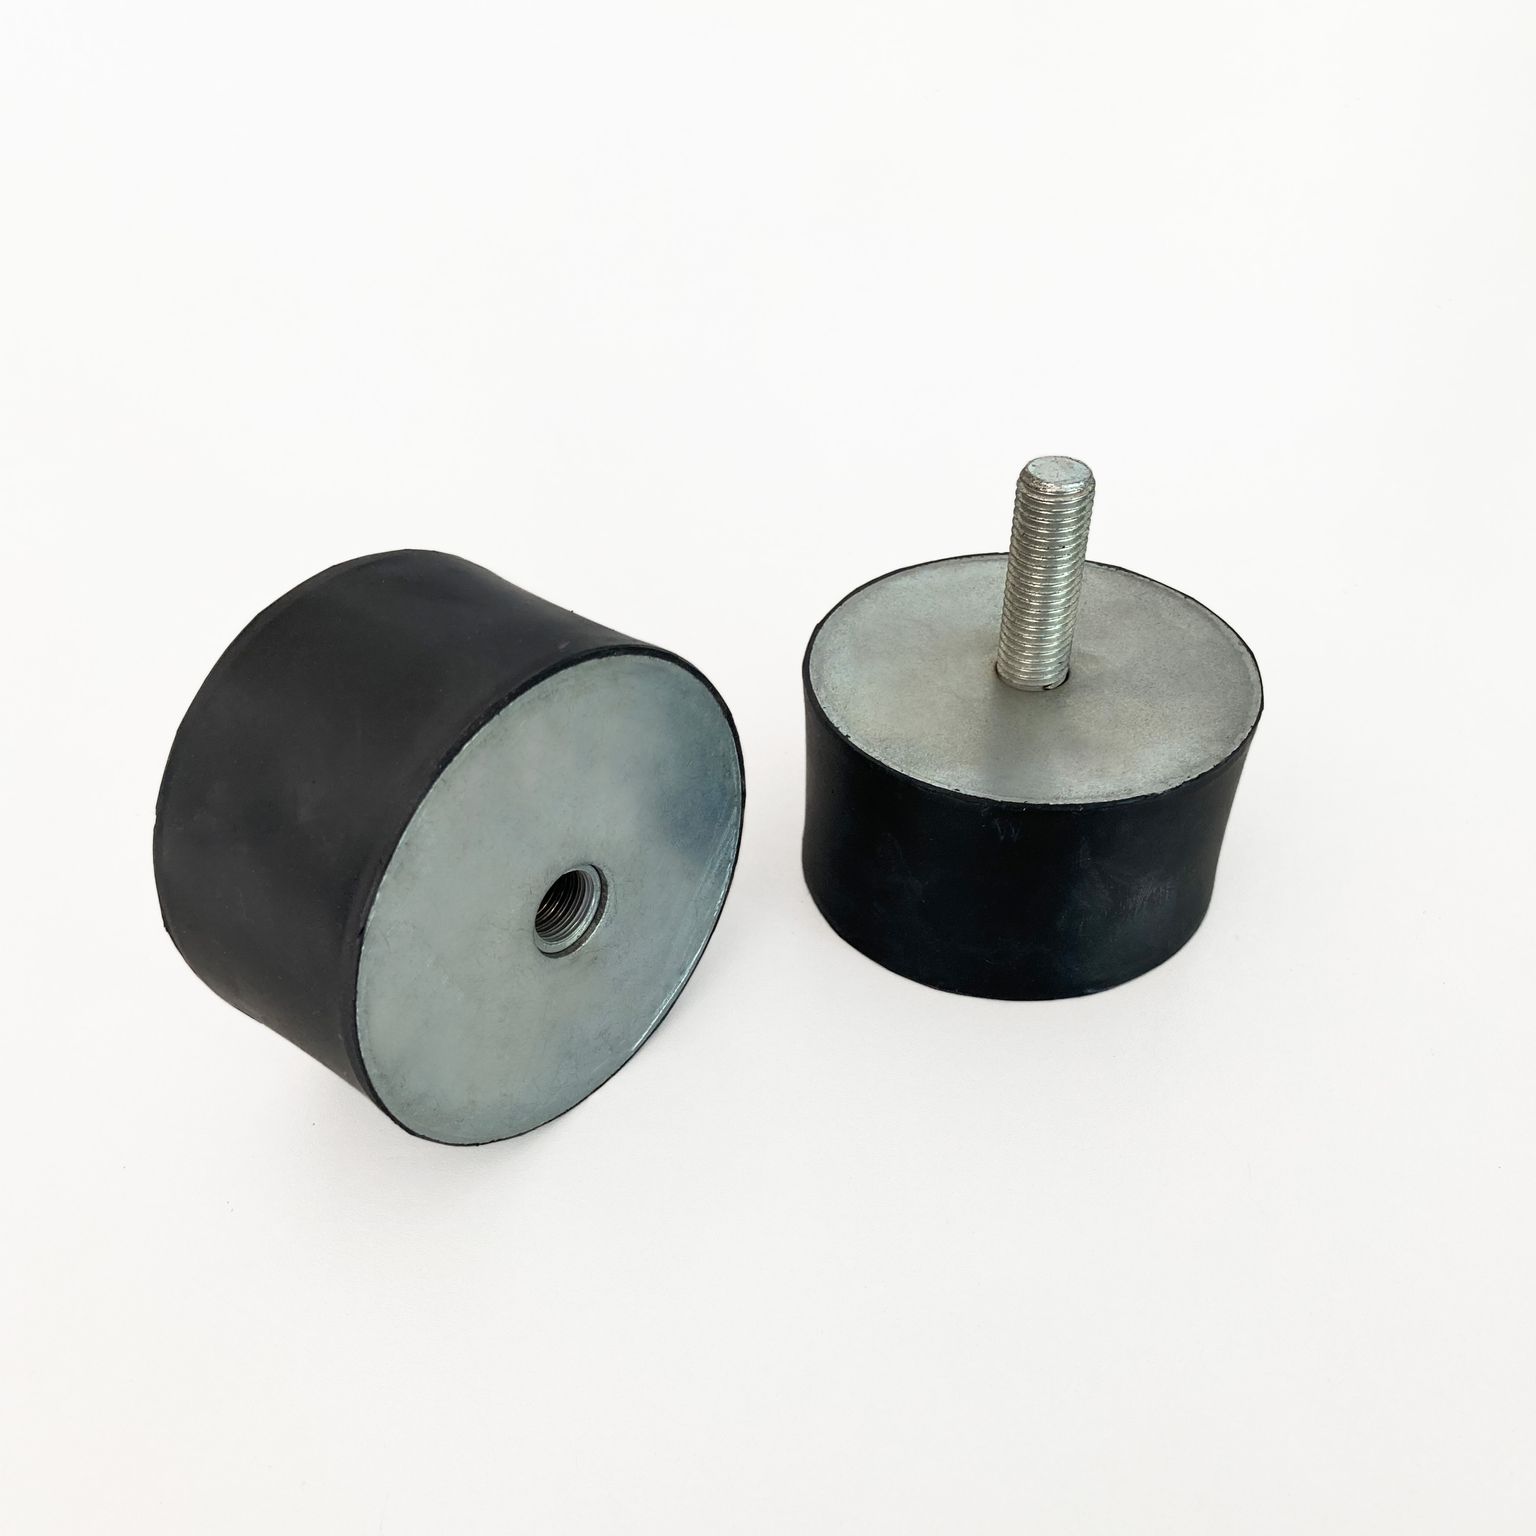 Vibration buffers with internal and external threads